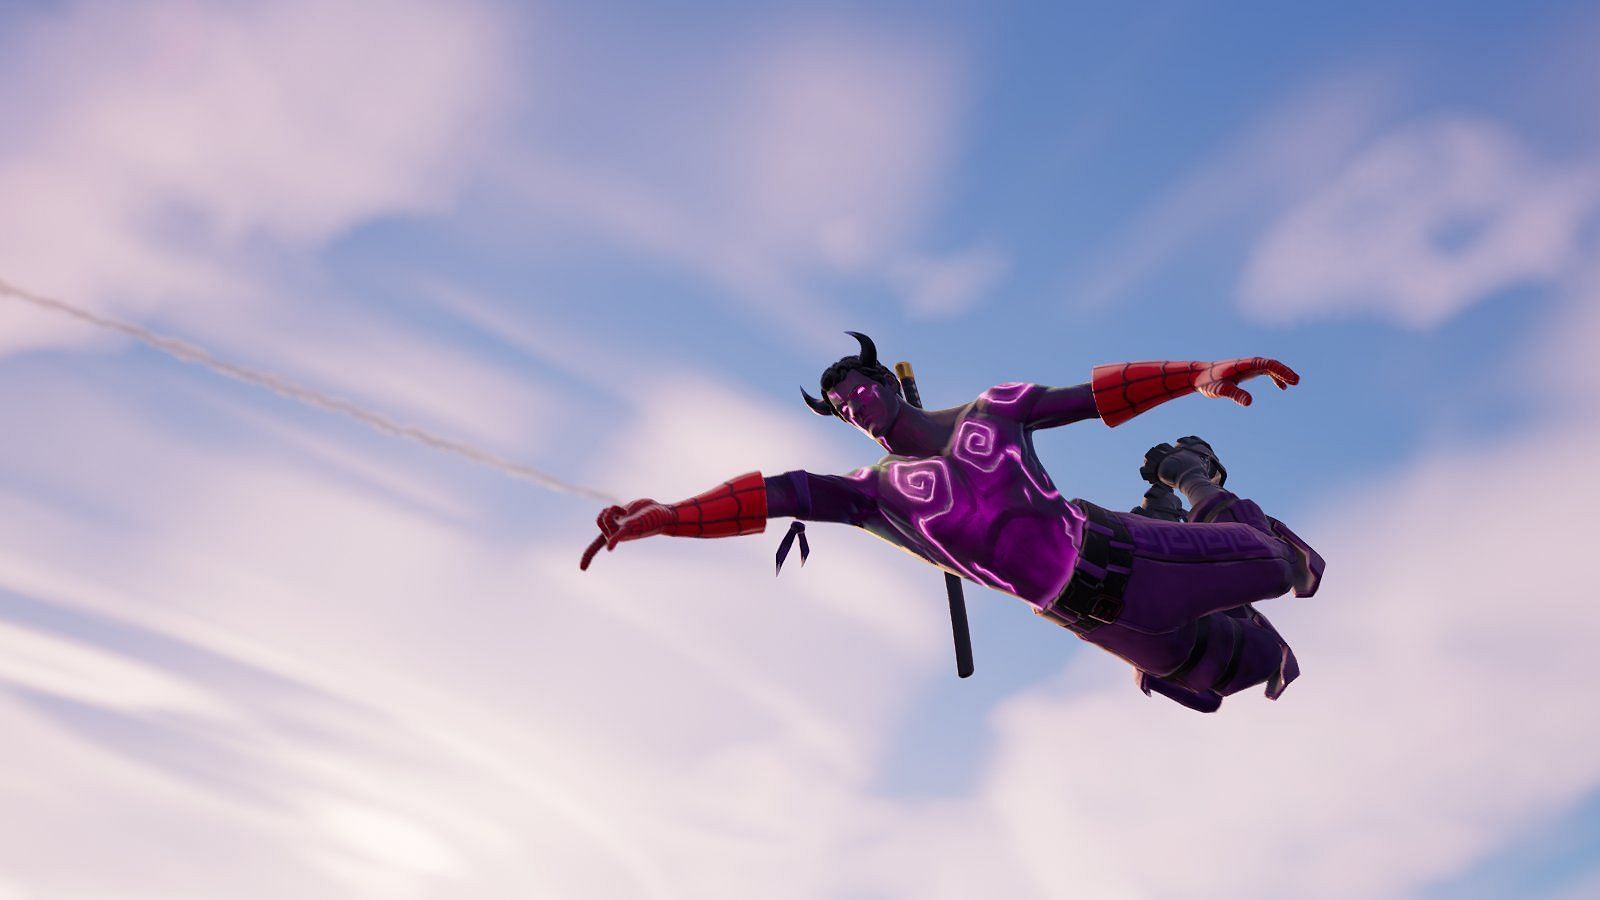 Fortnite Spiderman Mythic Webshooter glitch gives players infinite shots,  here is how